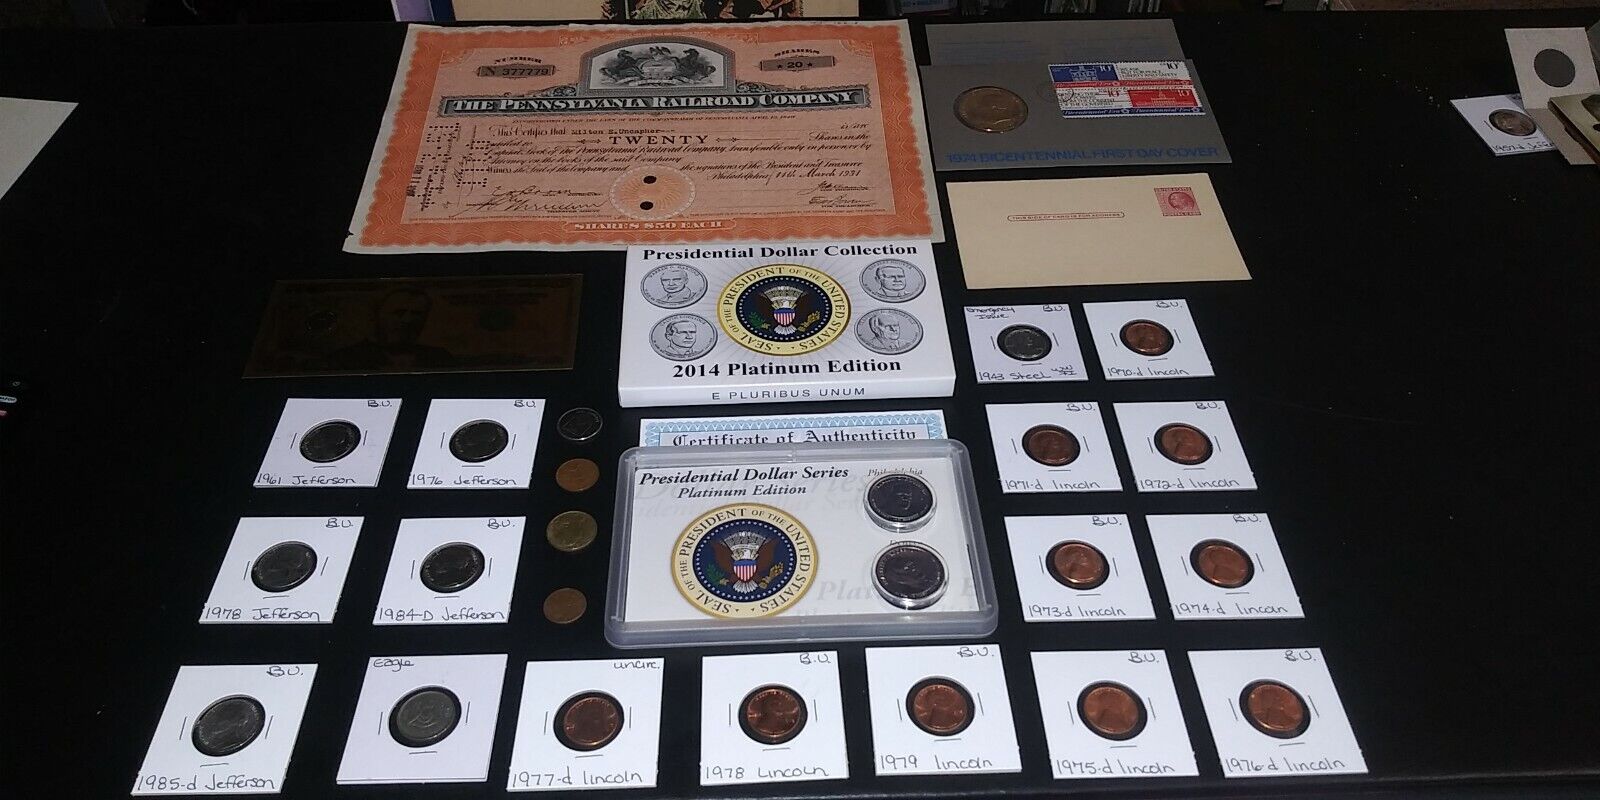 COIN LOT Collection US Coins,2014 Platinum Dollars,1974 First day Cover Medal,BU